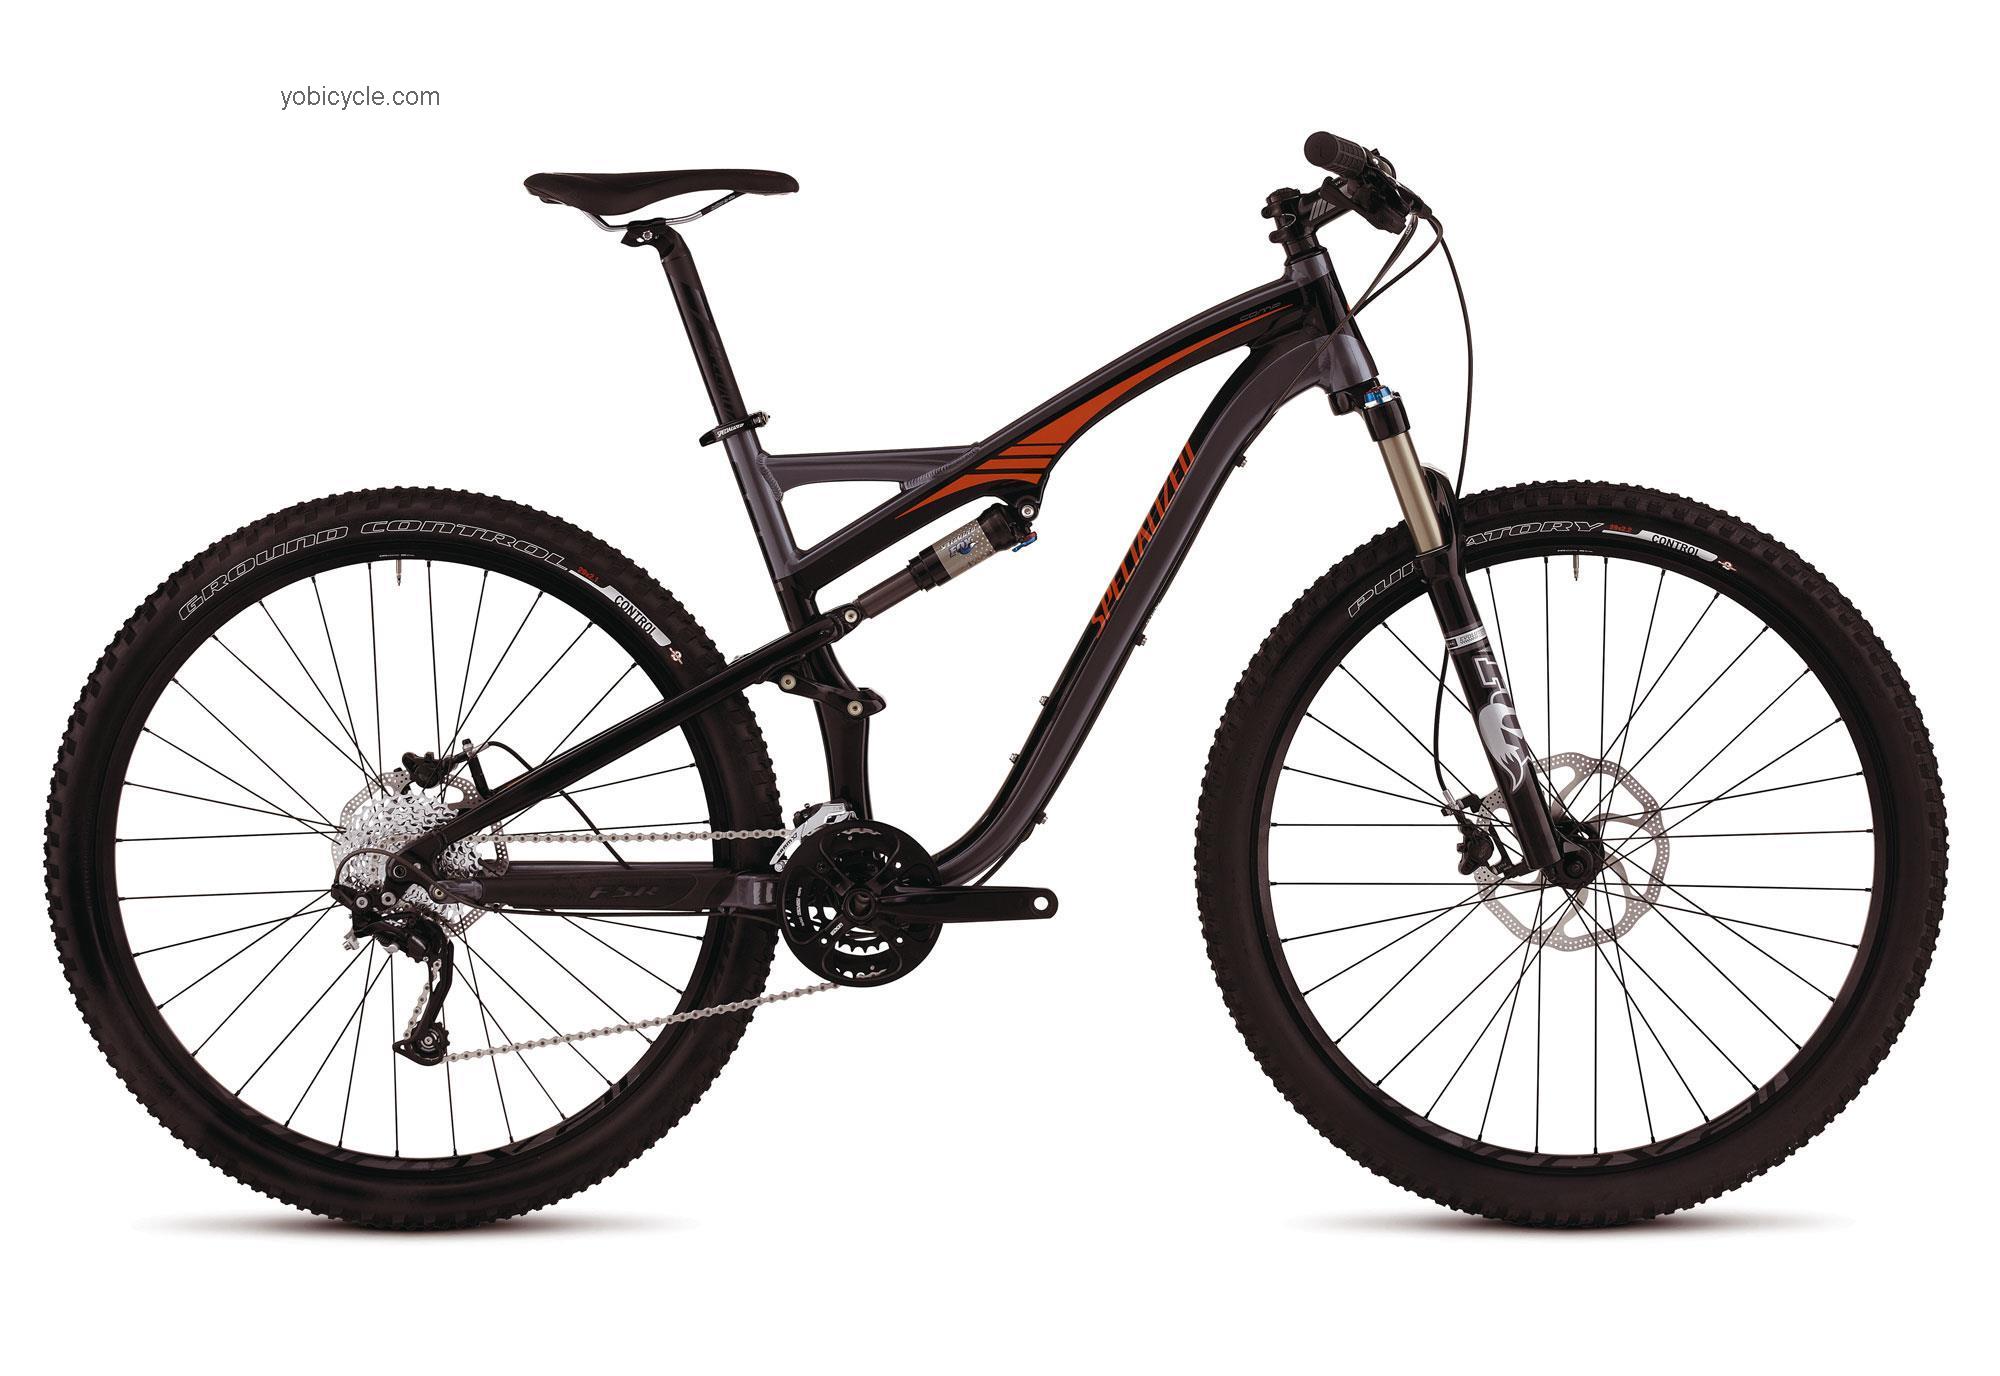 Specialized Camber FSR Comp 29 2012 comparison online with competitors